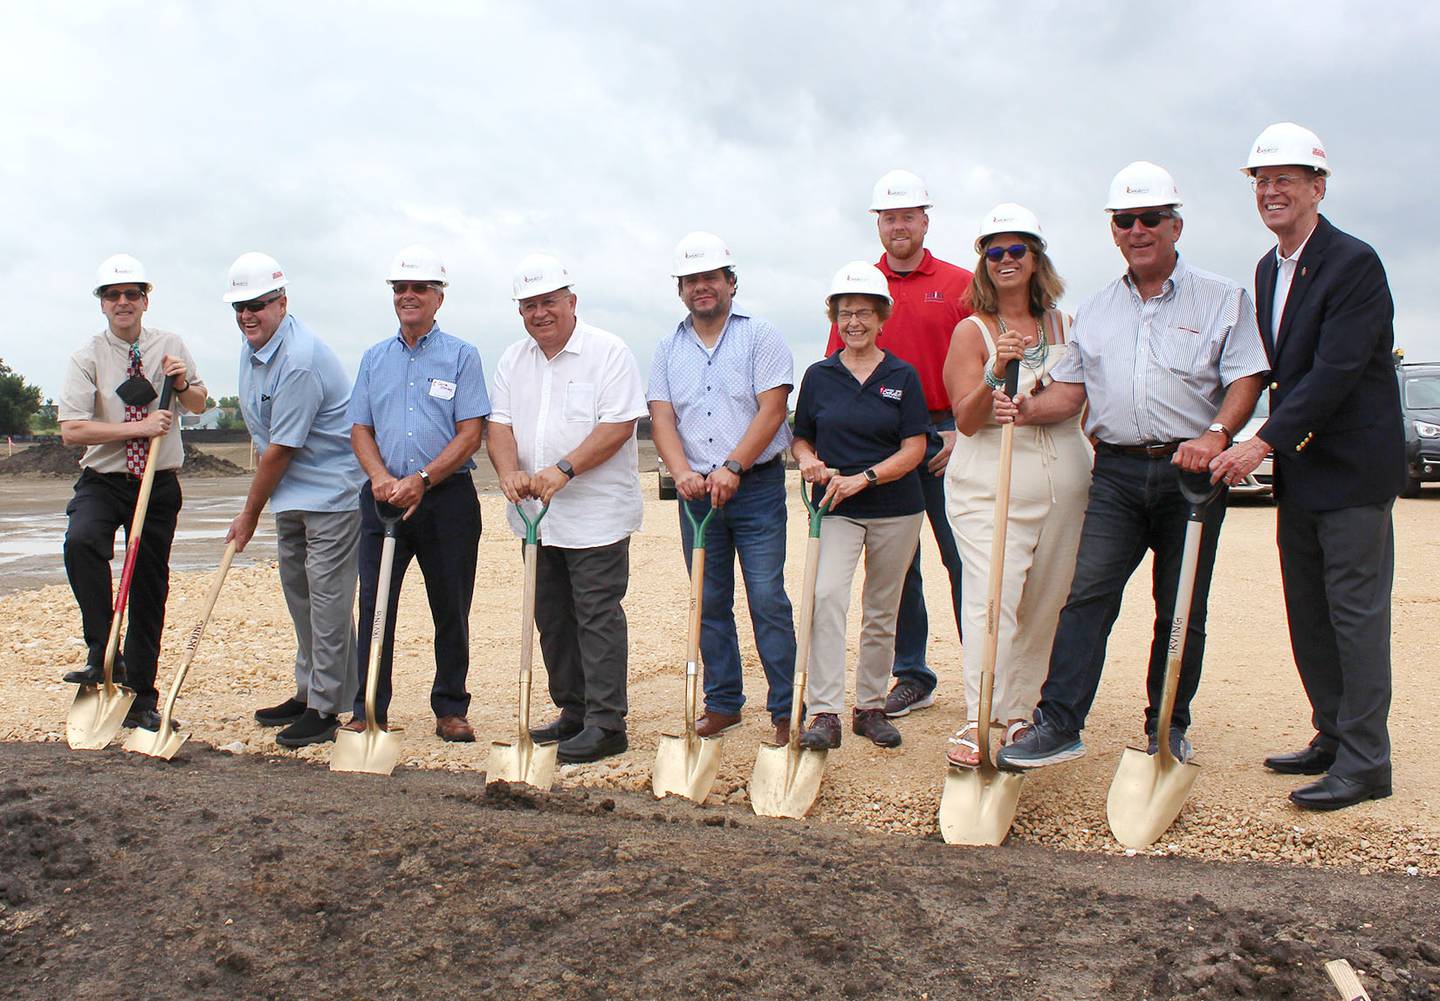 First United Methodist Church leaders in DeKalb hosted a groundbreaking ceremony July 24, 2022 to celebrate the start of construction on a new location on North Annie Glidden Road with city officials, congregants and members of the public.(Photo provided by First United Methodist Church)